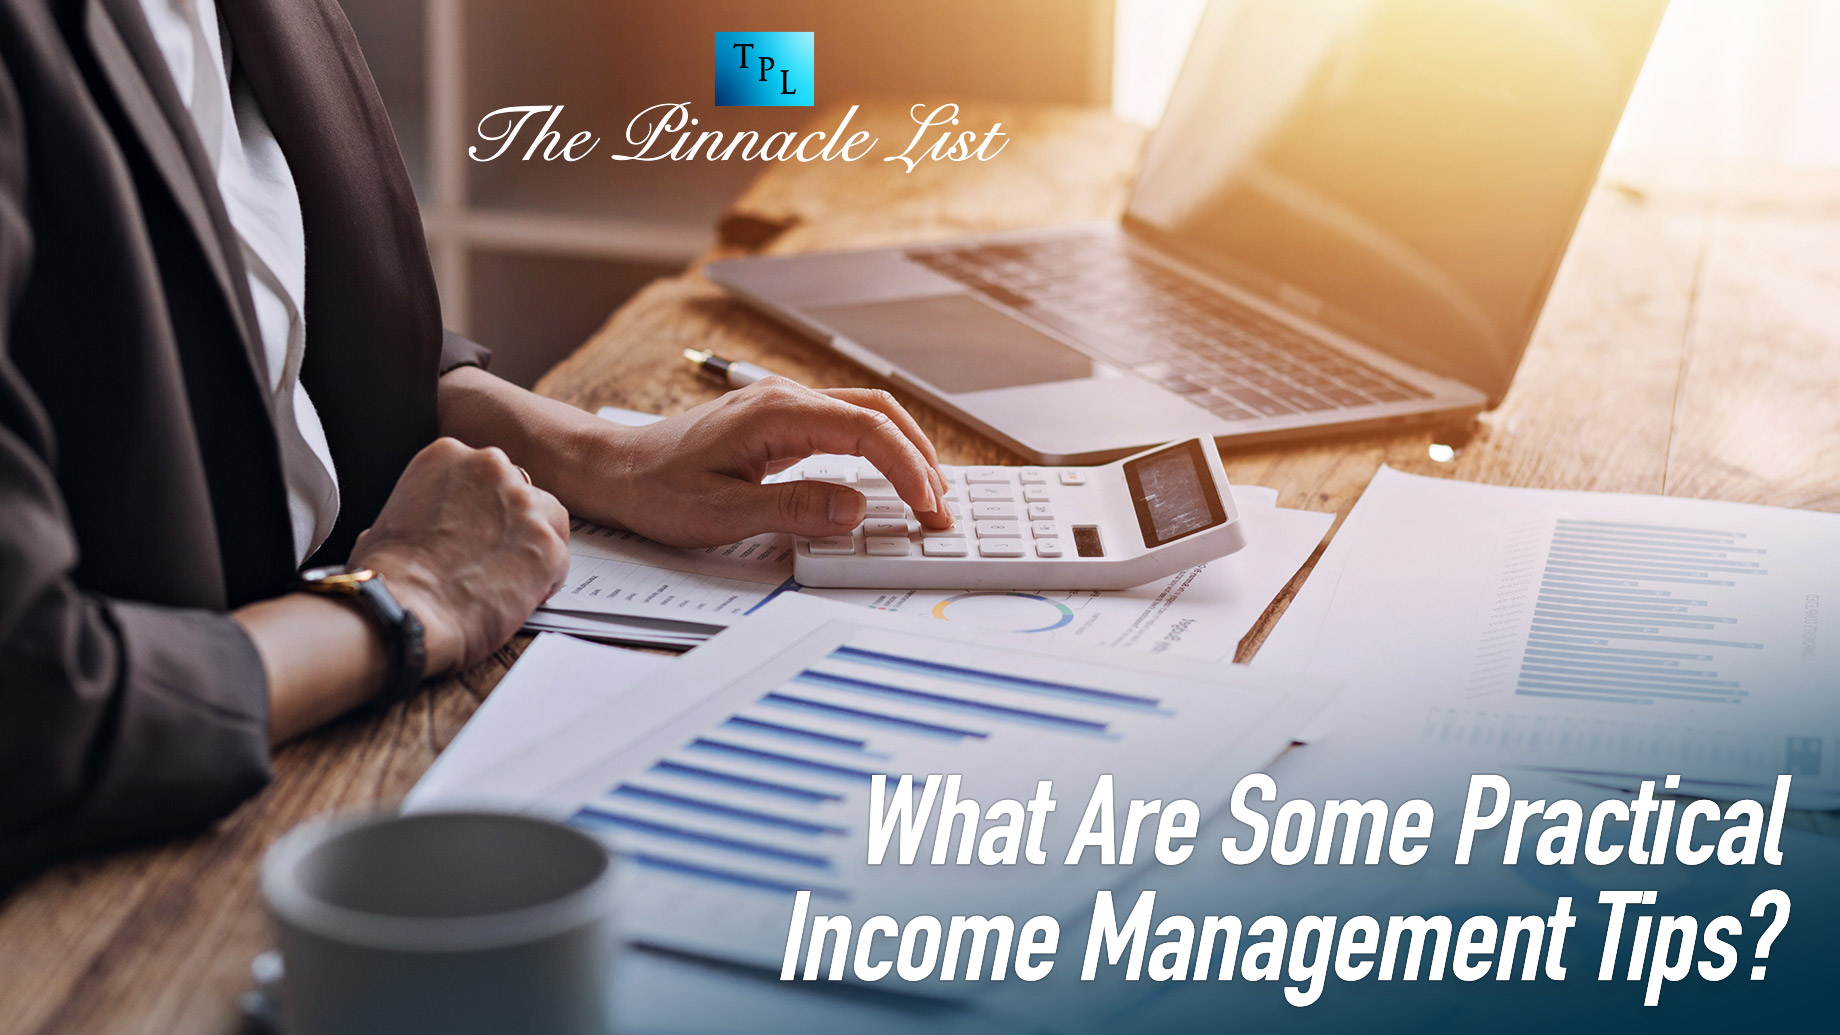 What Are Some Practical Income Management Tips?